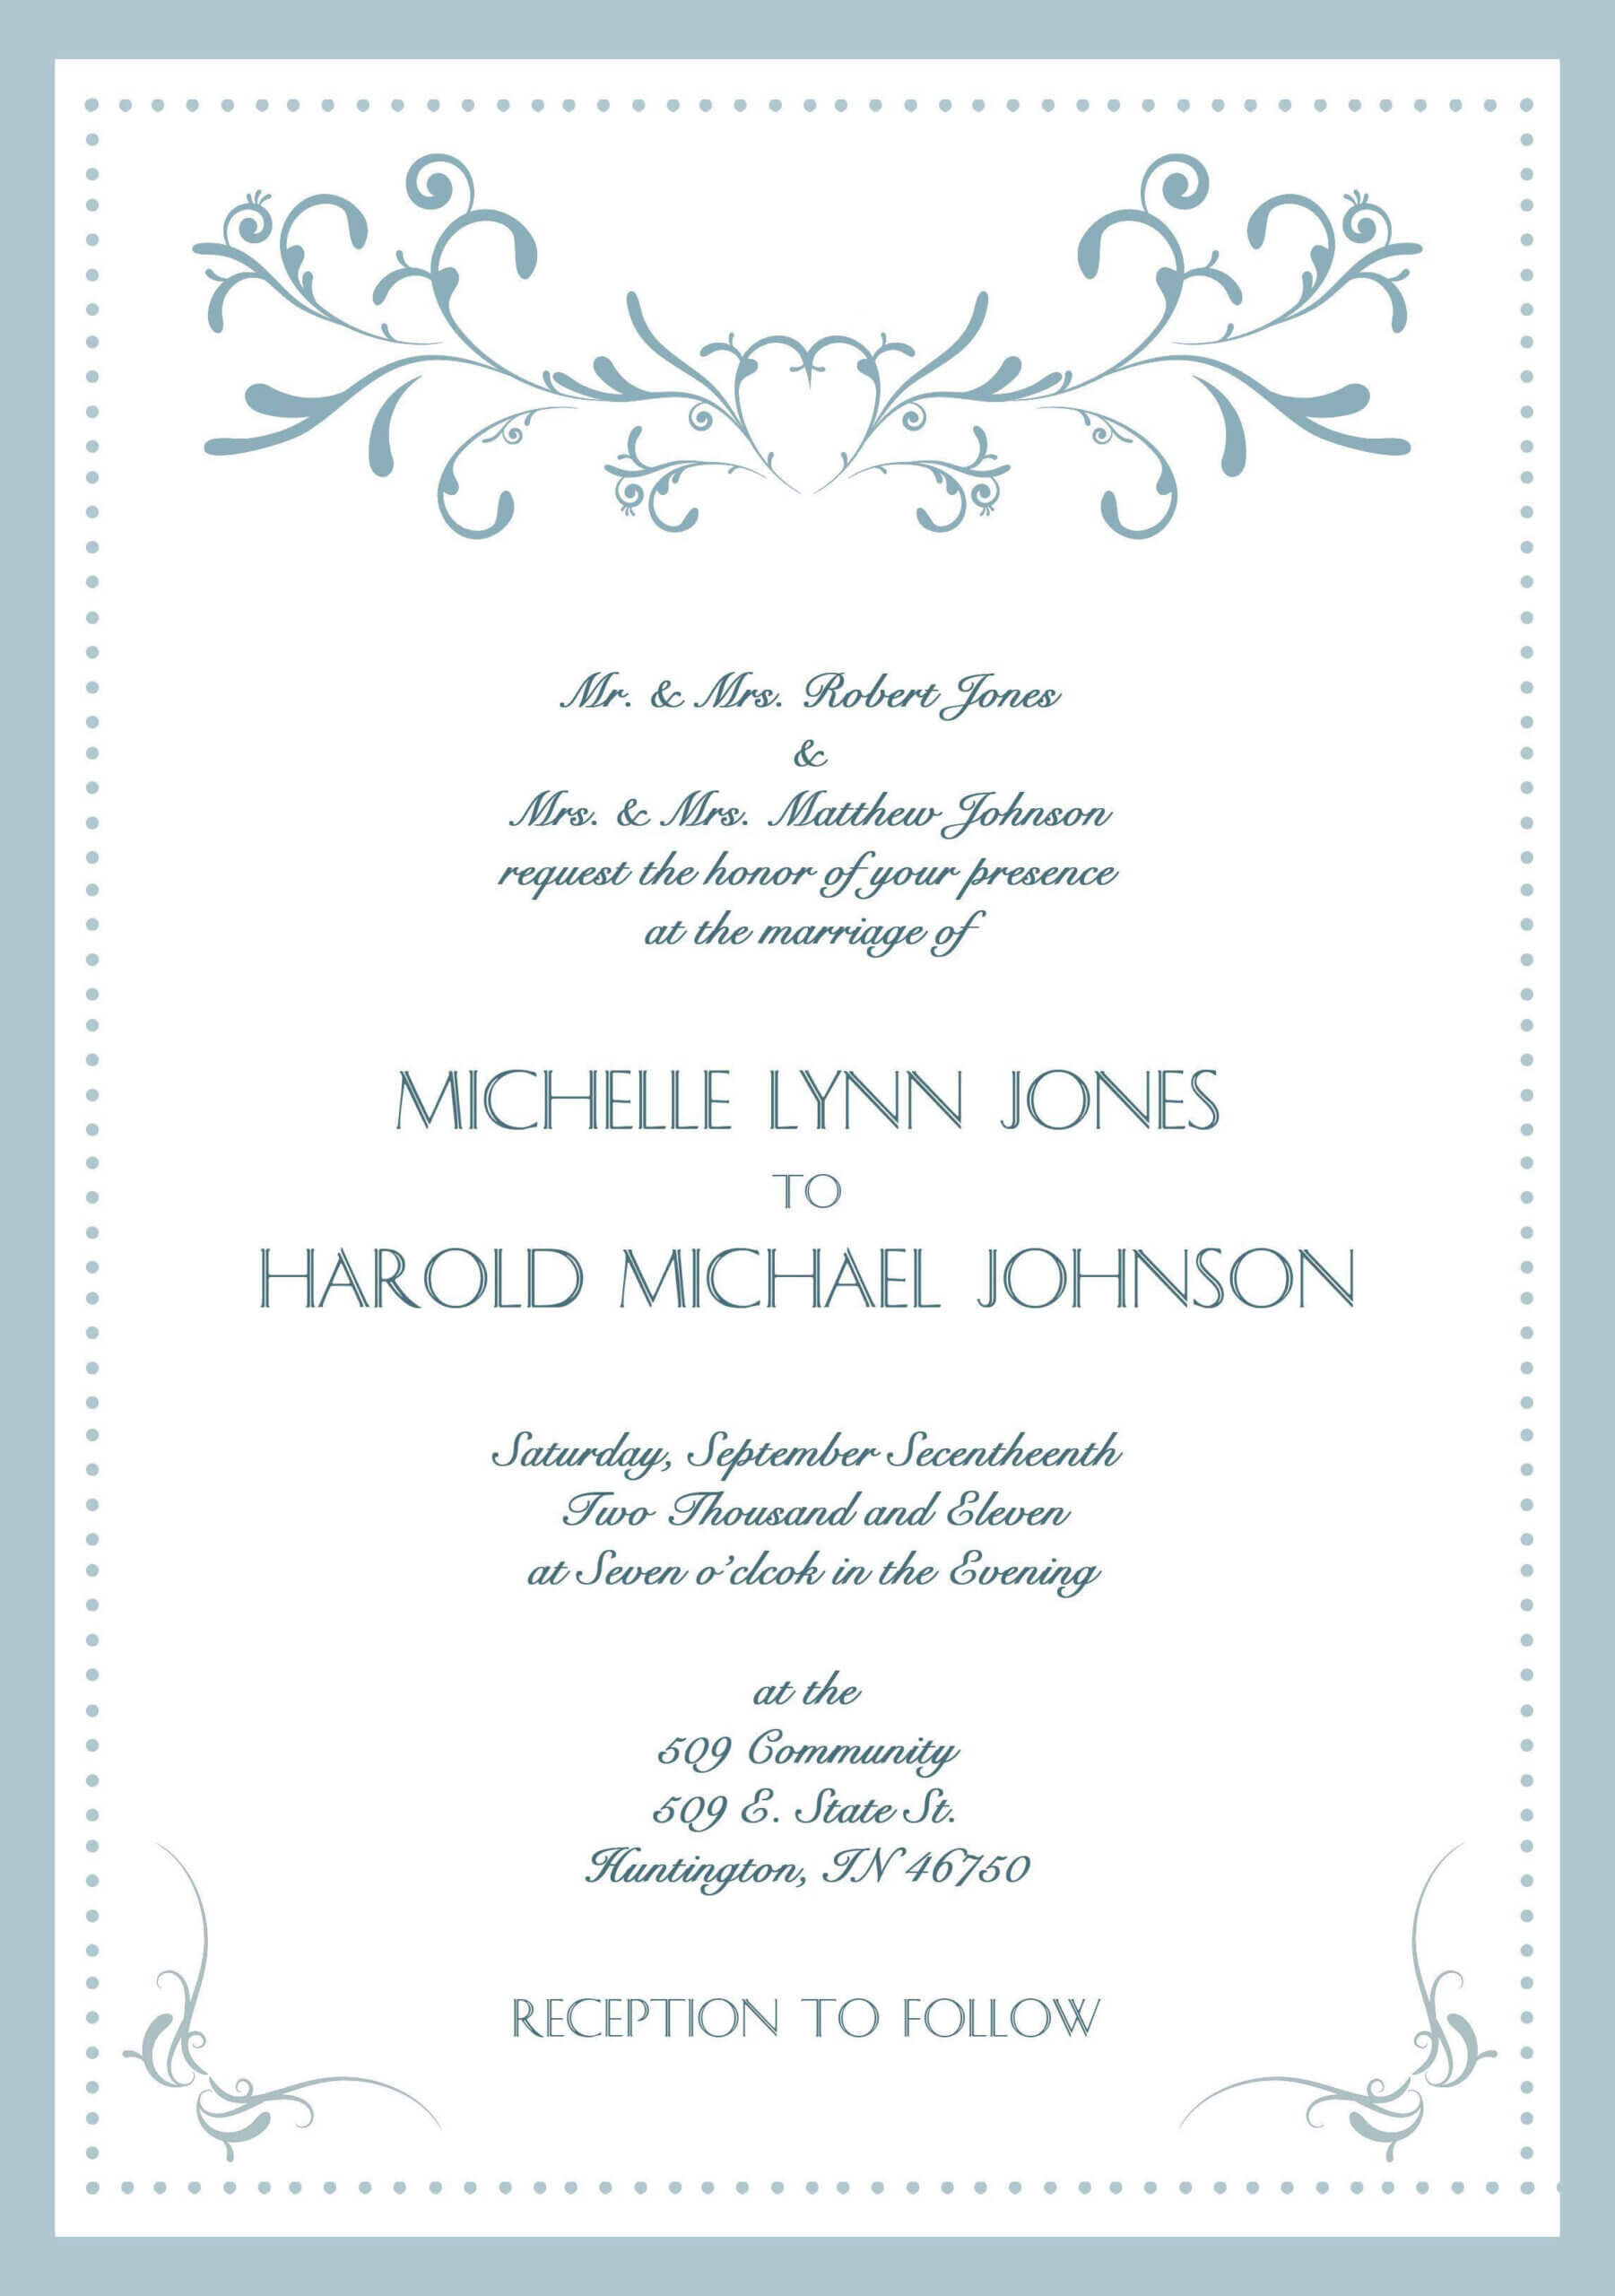 Sample Wedding Invitation Cards In English In 2020 | Wedding Intended For Sample Wedding Invitation Cards Templates